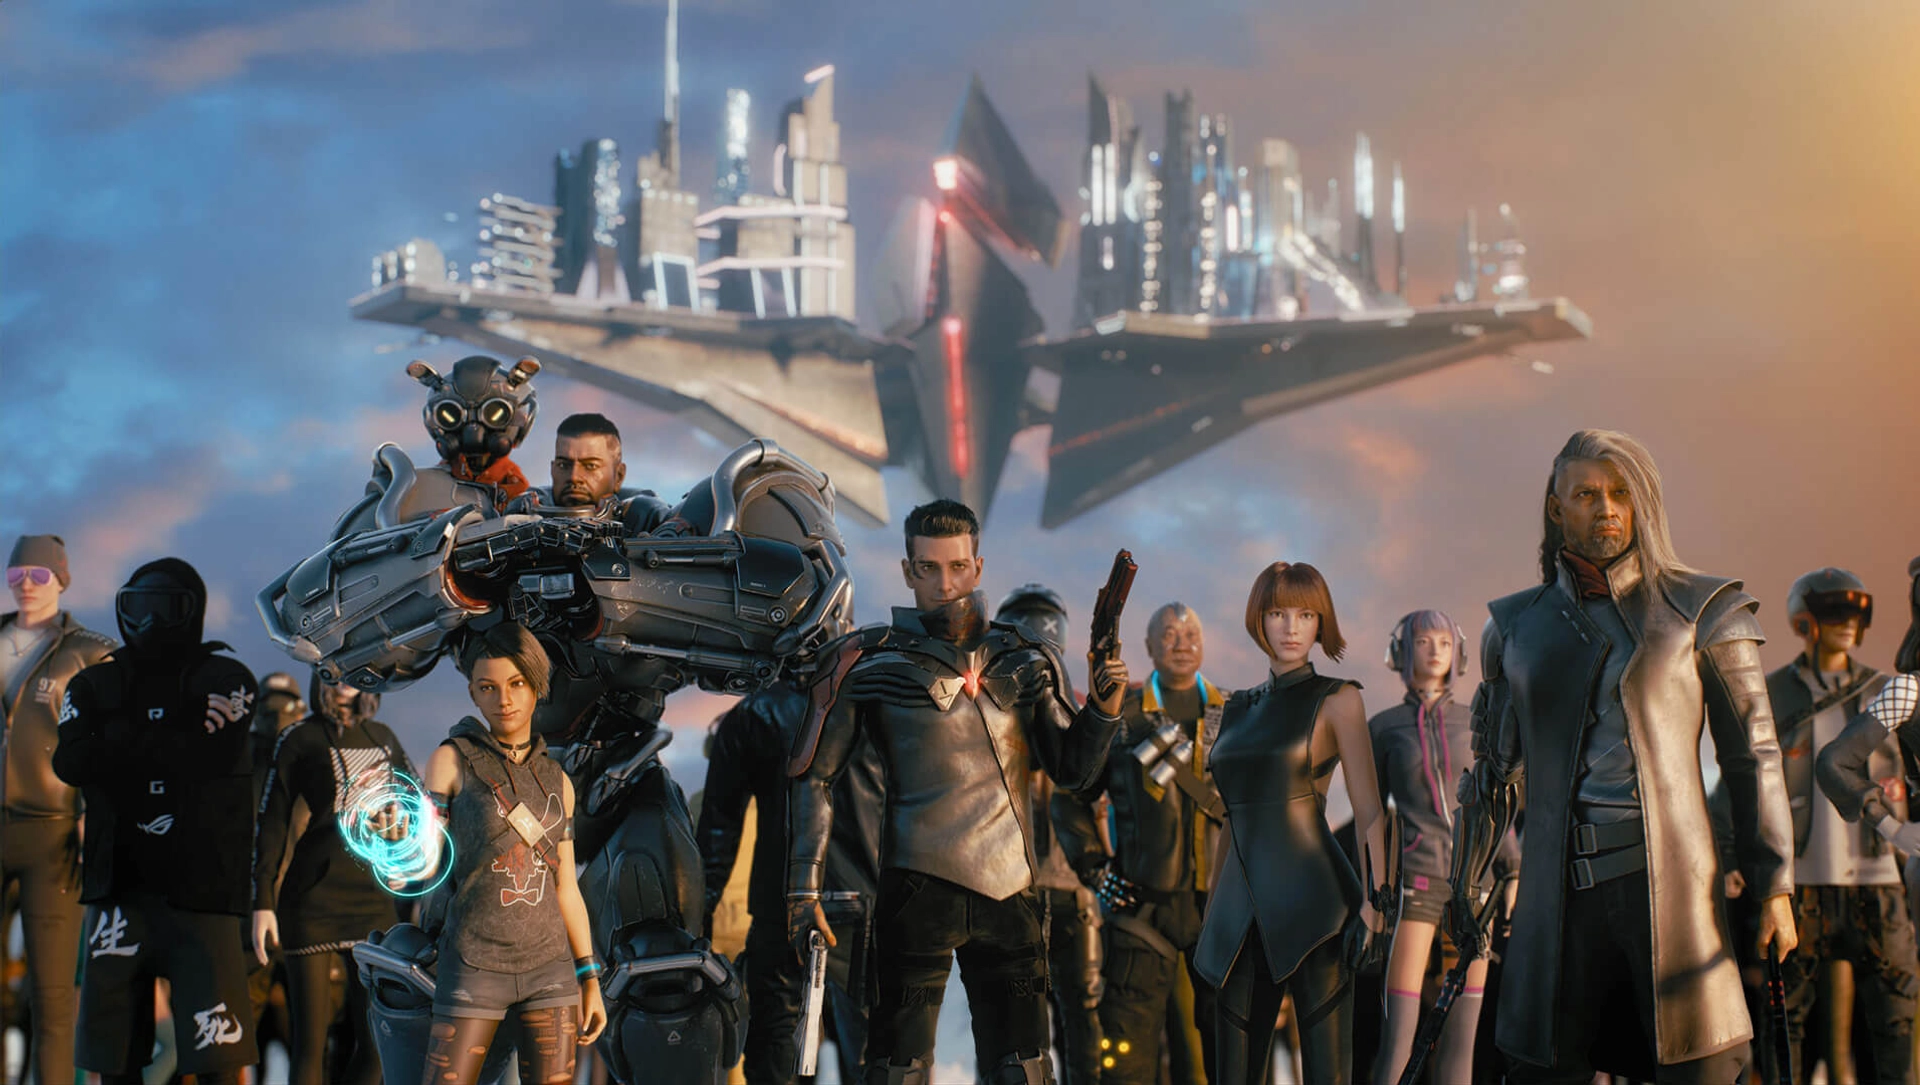 Image of AchT, OMNI, GO, HORSEMAN, SEVEN, AKIRA, and a group of Gamers in the frame. Lapuntu is floating in the background.